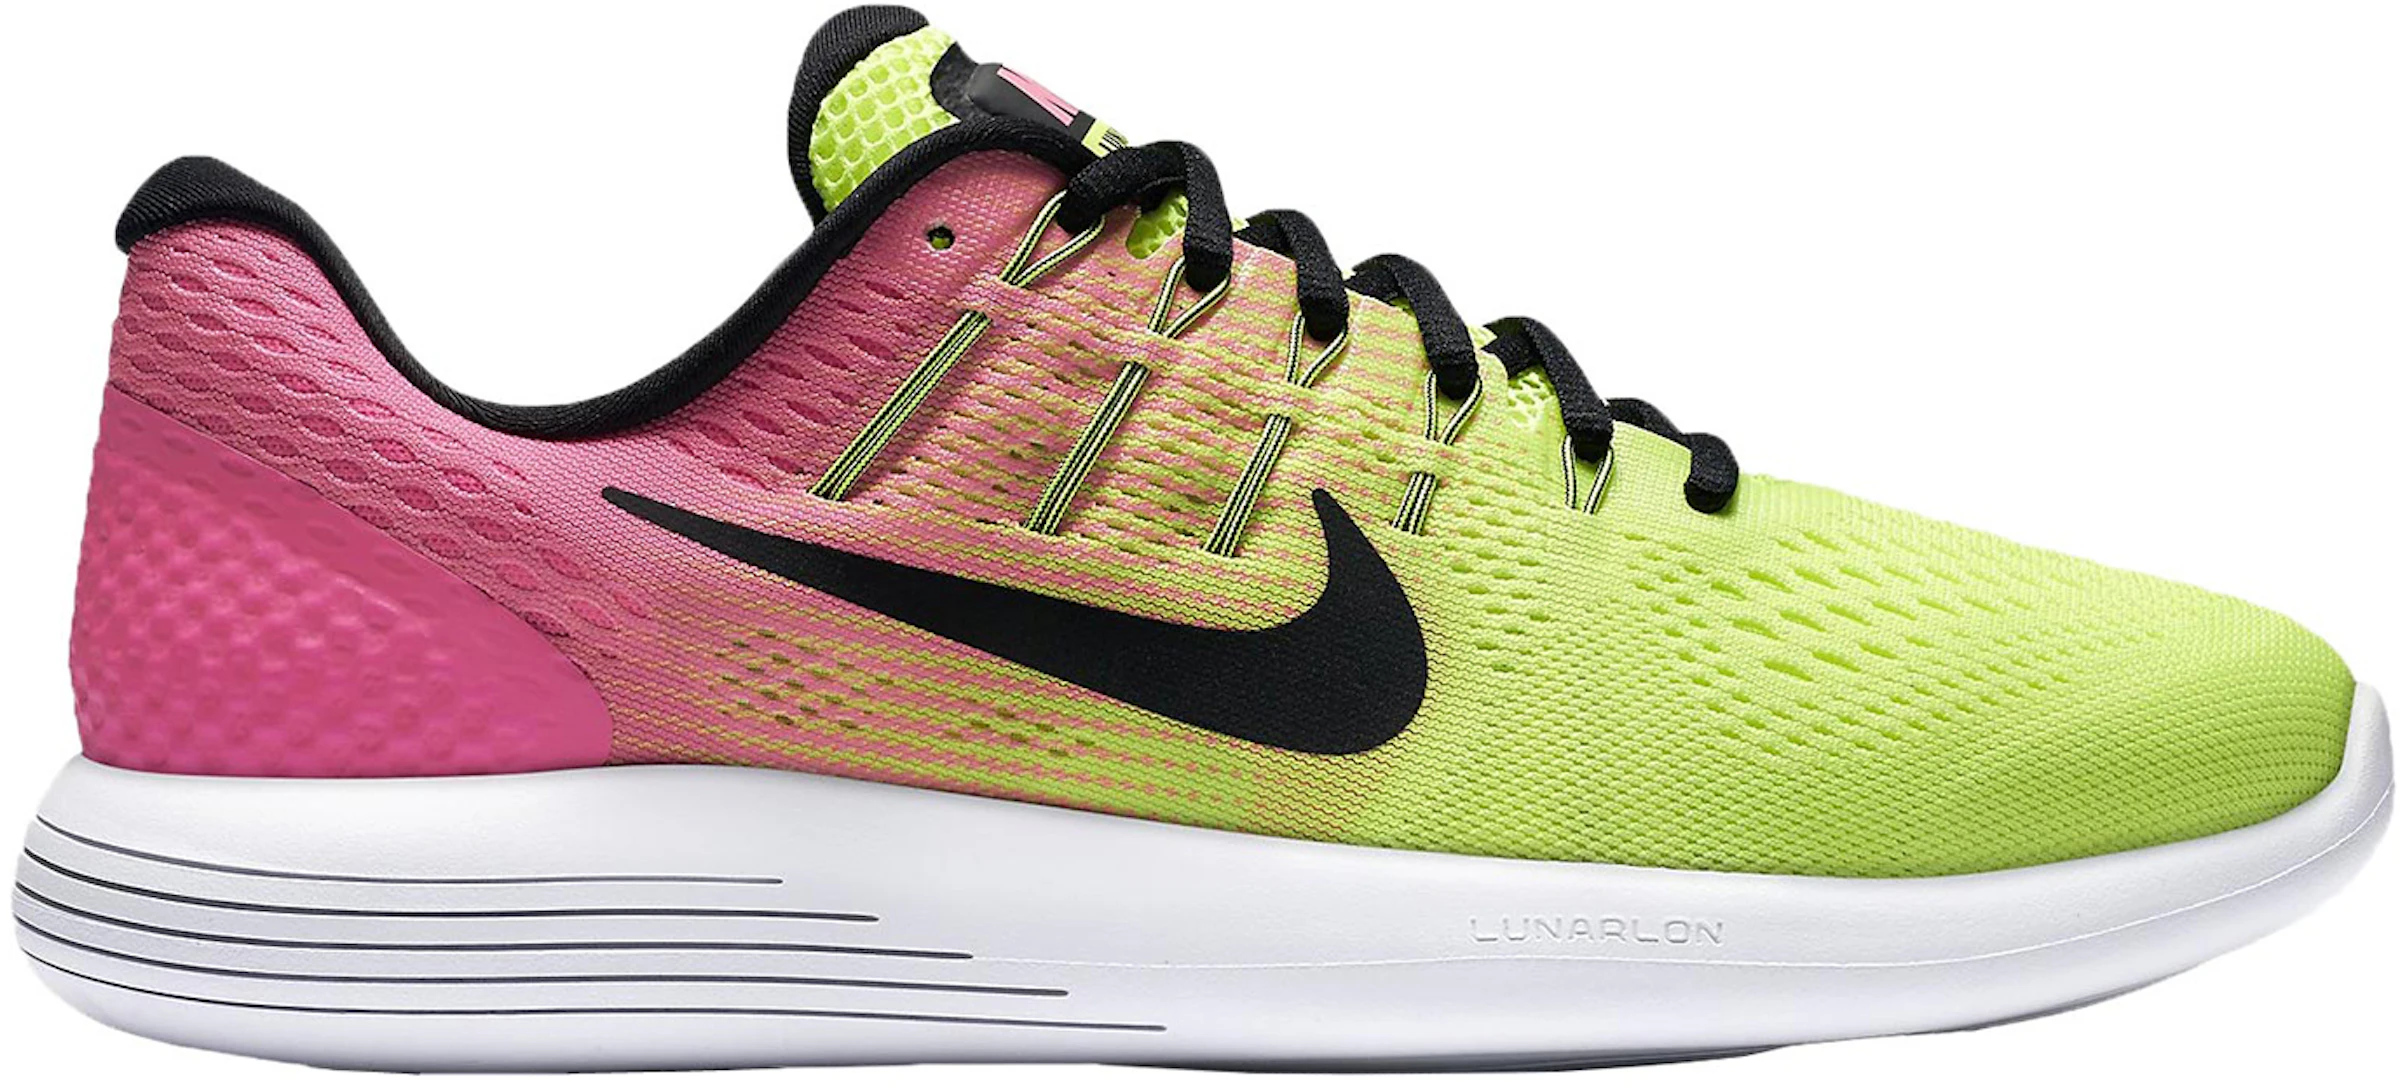 Nike Lunarglide 8 OC Unlimited Olympic - 844632-999 - US